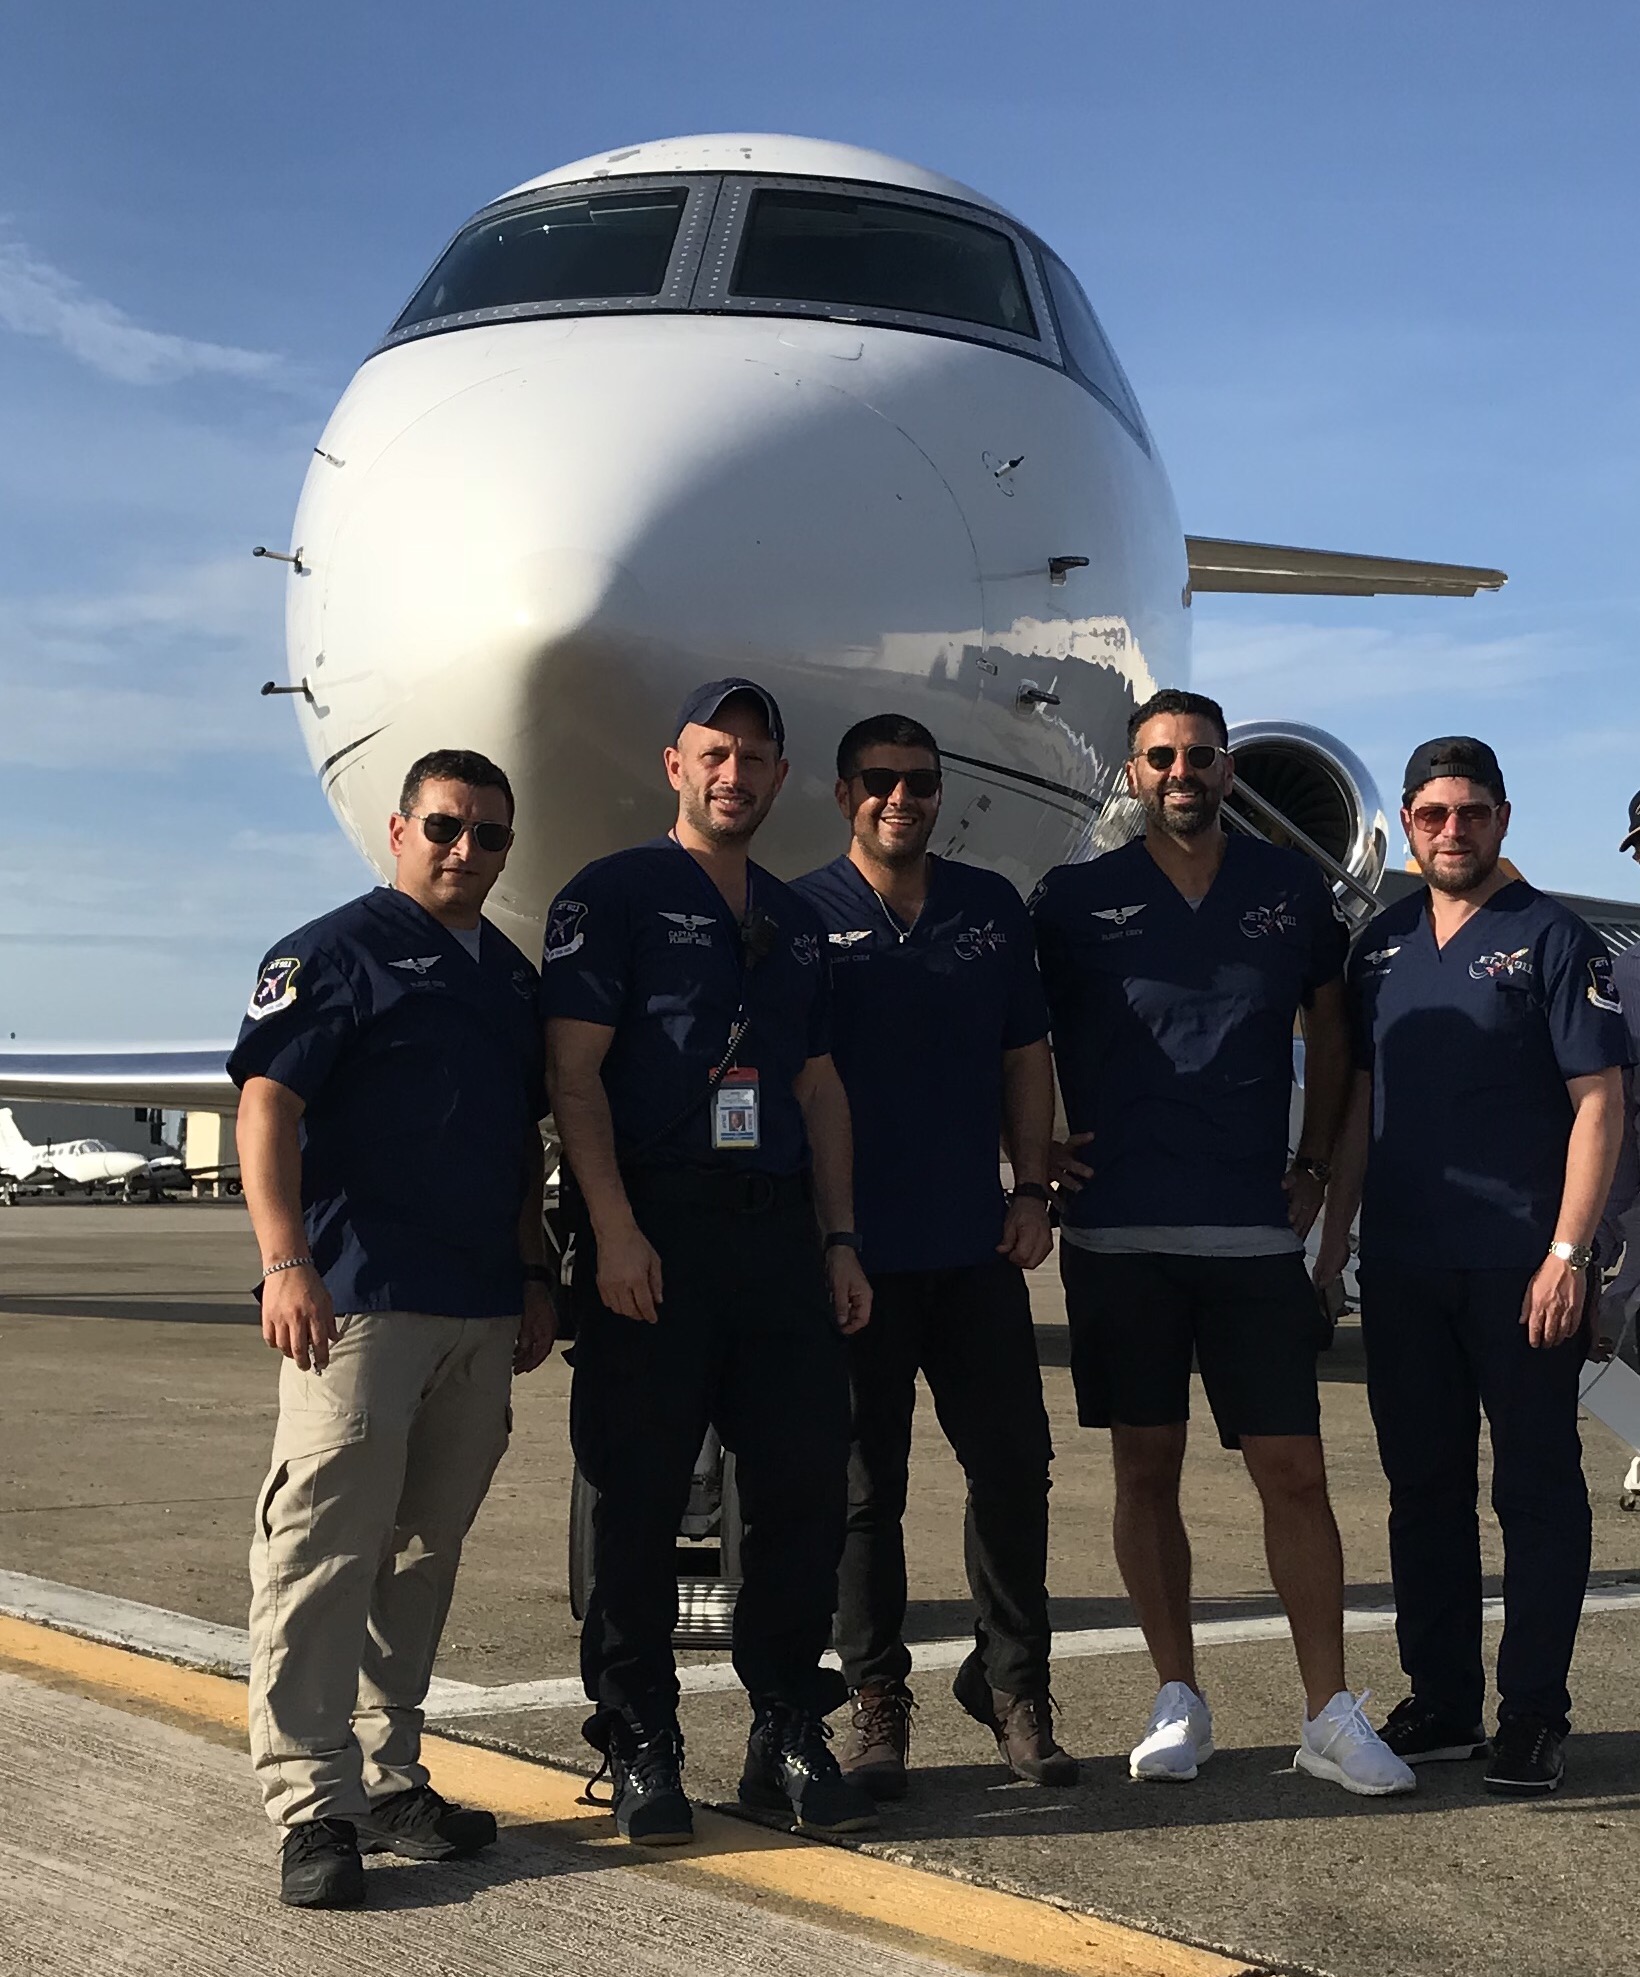 Eli Rowe, second from left, with members of his volunteer aid team from New York standing in front of the airplane that was donated to make the trip to San Juan, September 25, 2017. (Courtesy of Rowe/via JTA)